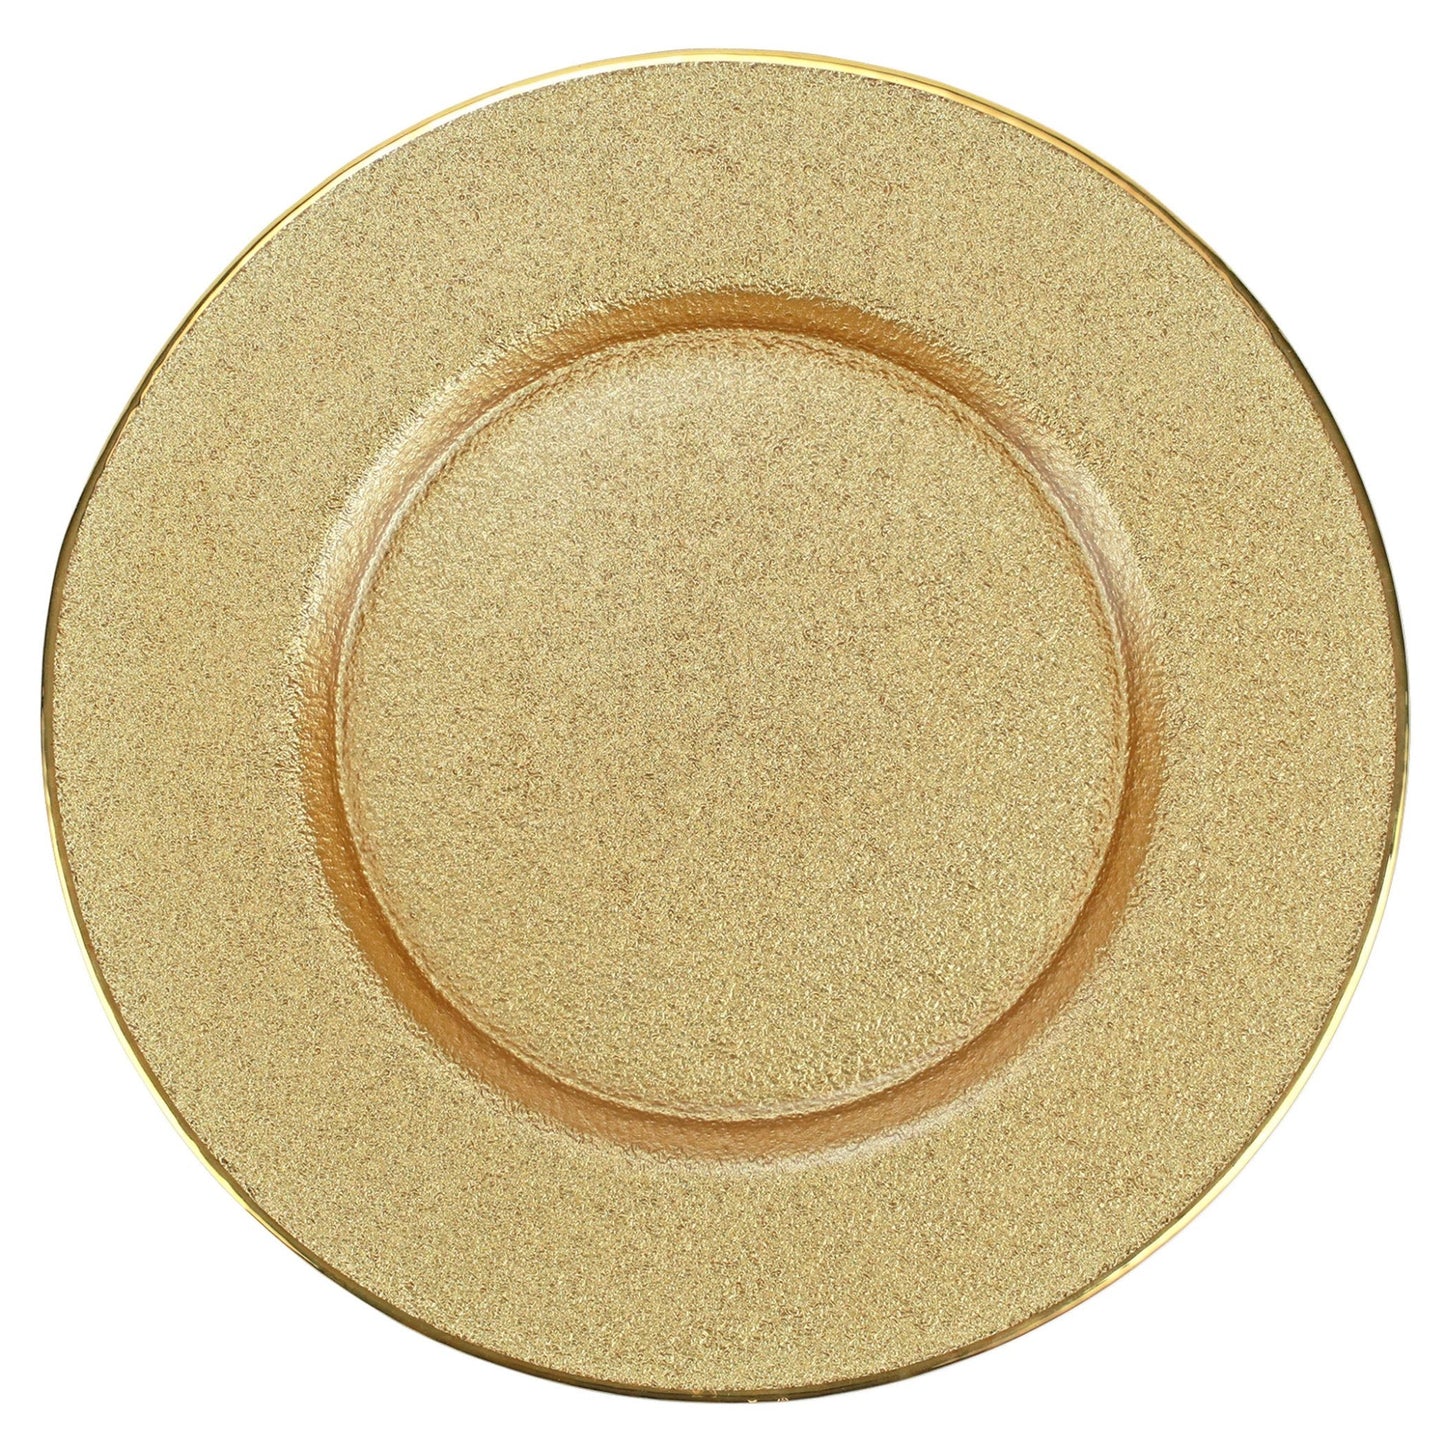 Metallic Glass Gold Service Plate/Charger - Gaines Jewelers